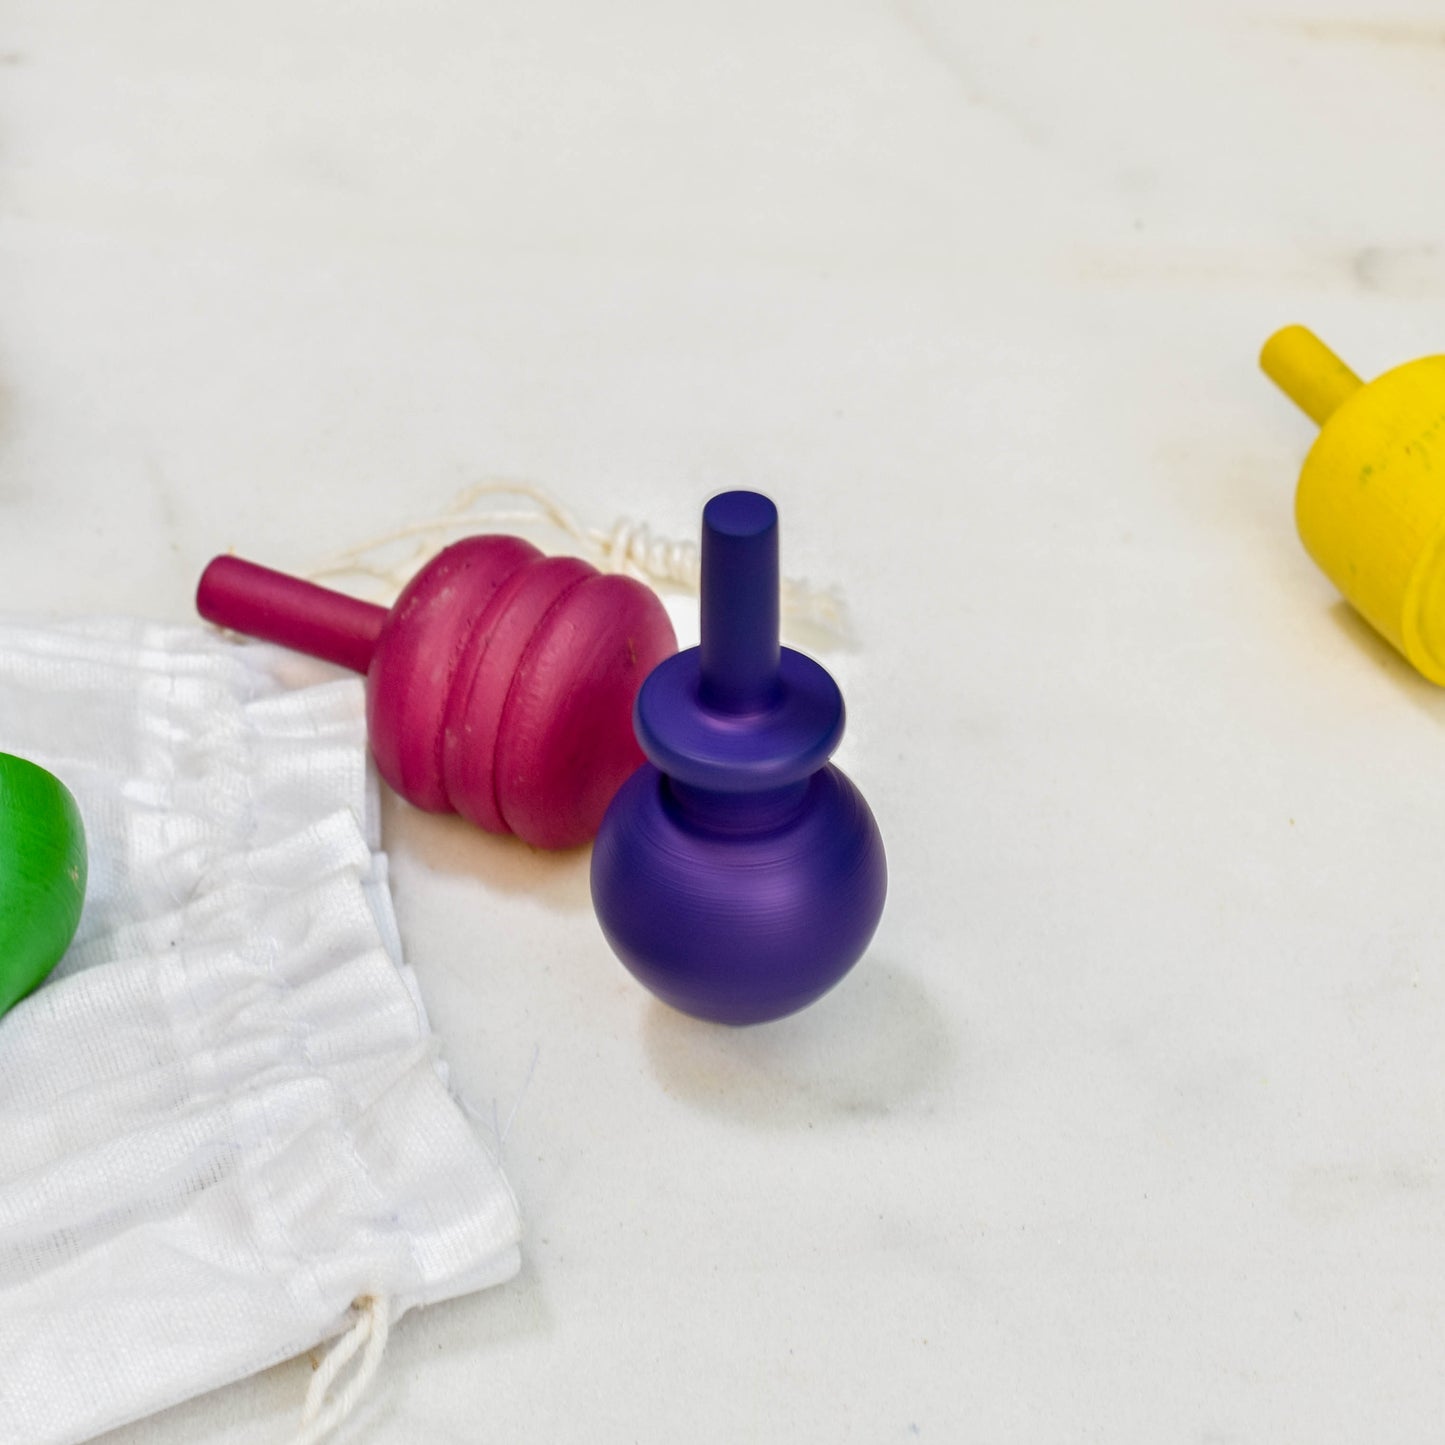 Scrapshala Wooden Spin Toy | Pack of 5 | 3 to 12 years old | Chemical-free | Handmade in Banaras